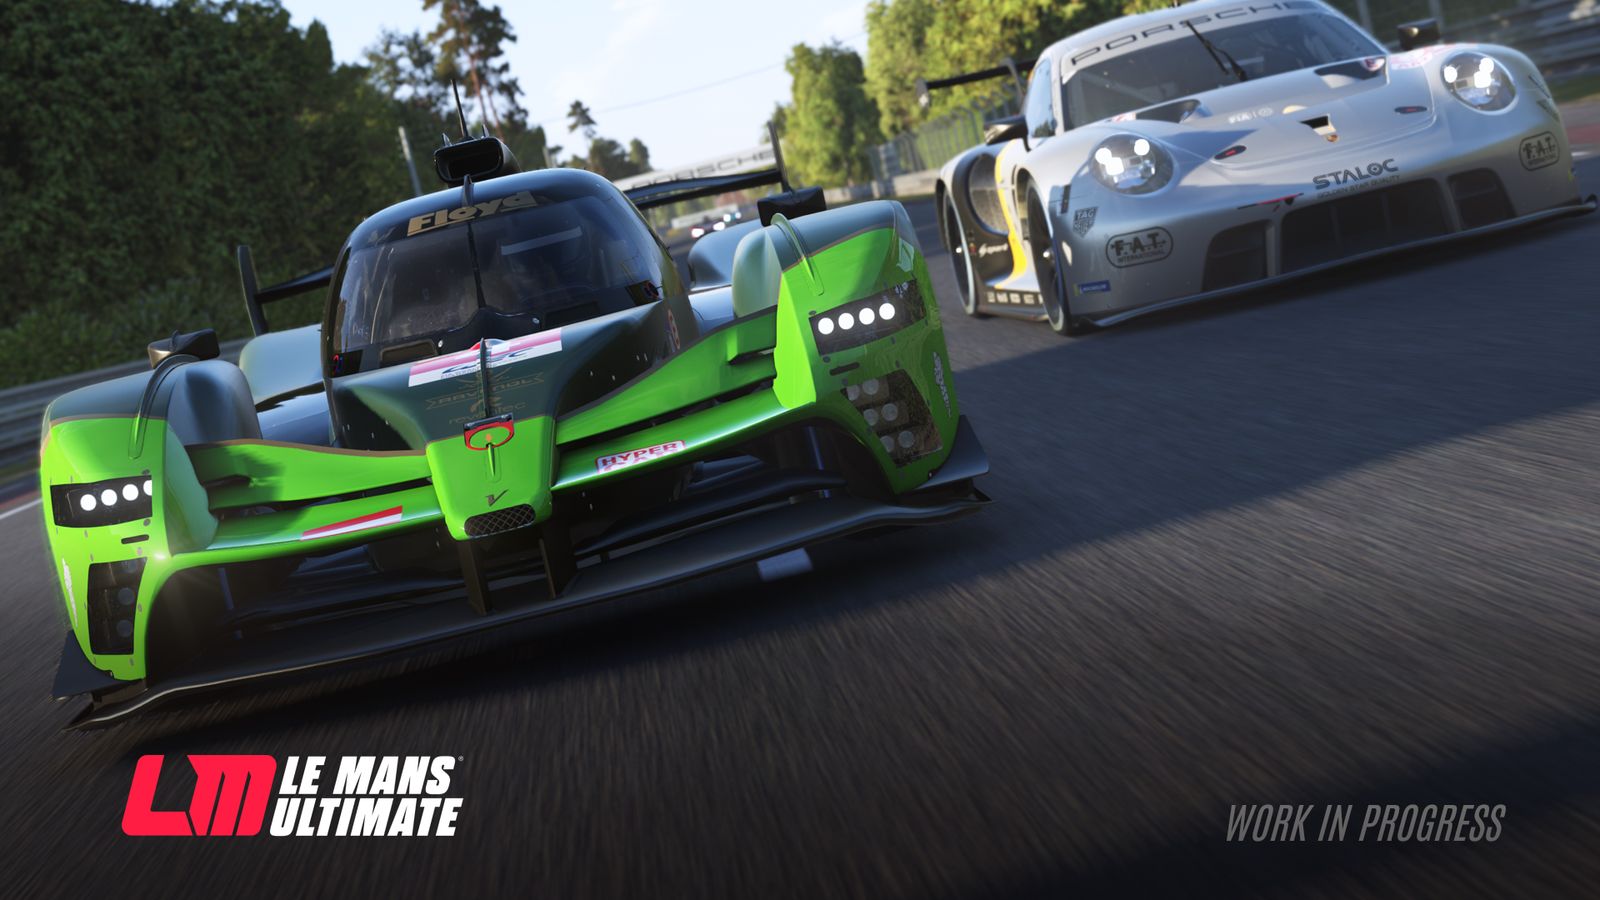 Le Mans Ultimate early access